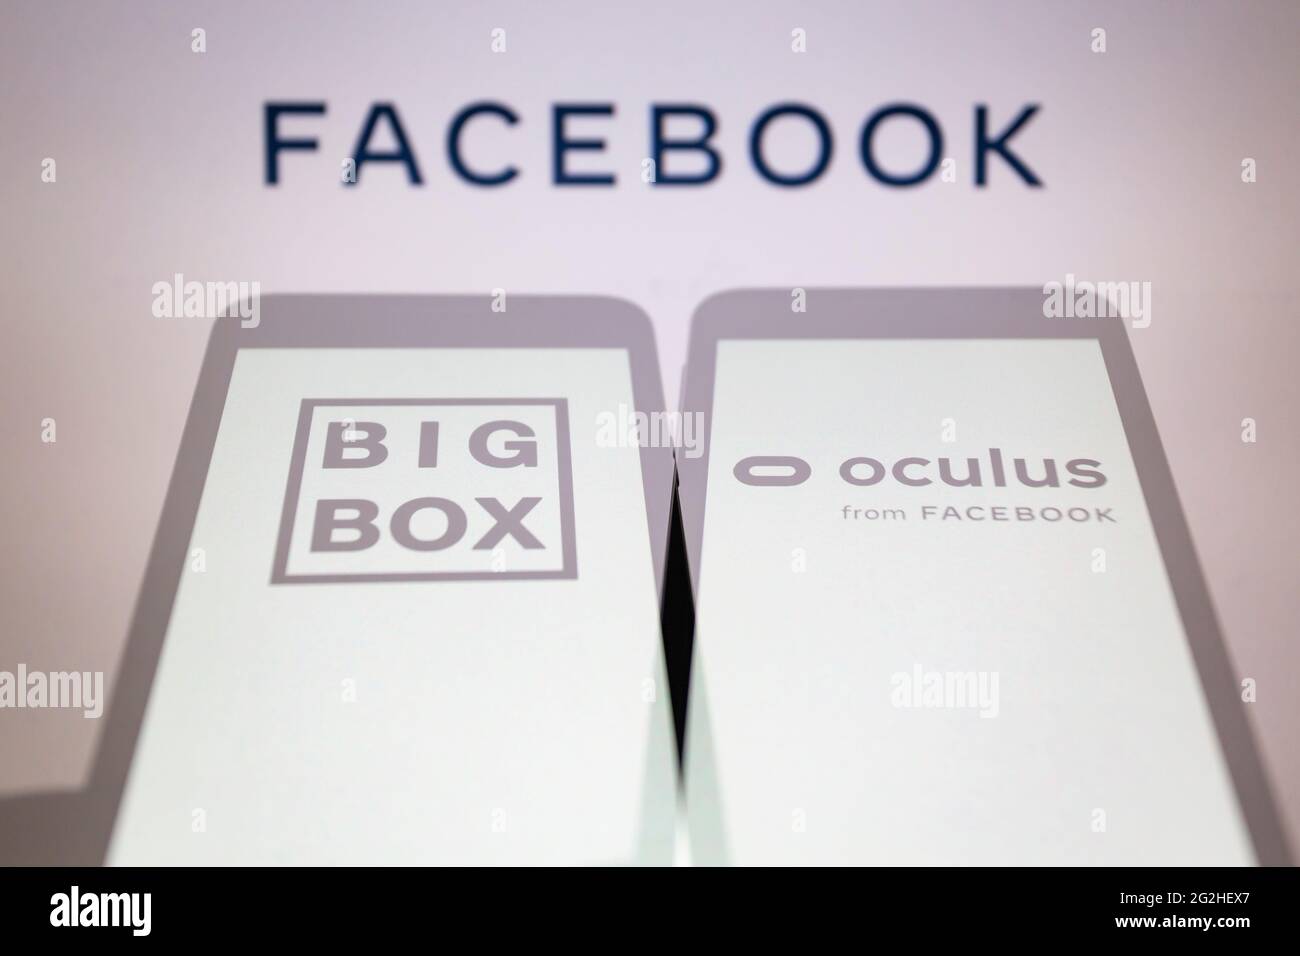 Asuncion Paraguay 11th June 21 Illustration Photo In Camera Multiple Exposure Image Shows Logos Of Bigbox Vr And Oculus On Smartphone Backdropped By The Logo Of Facebook Company On Screen Facebook Has